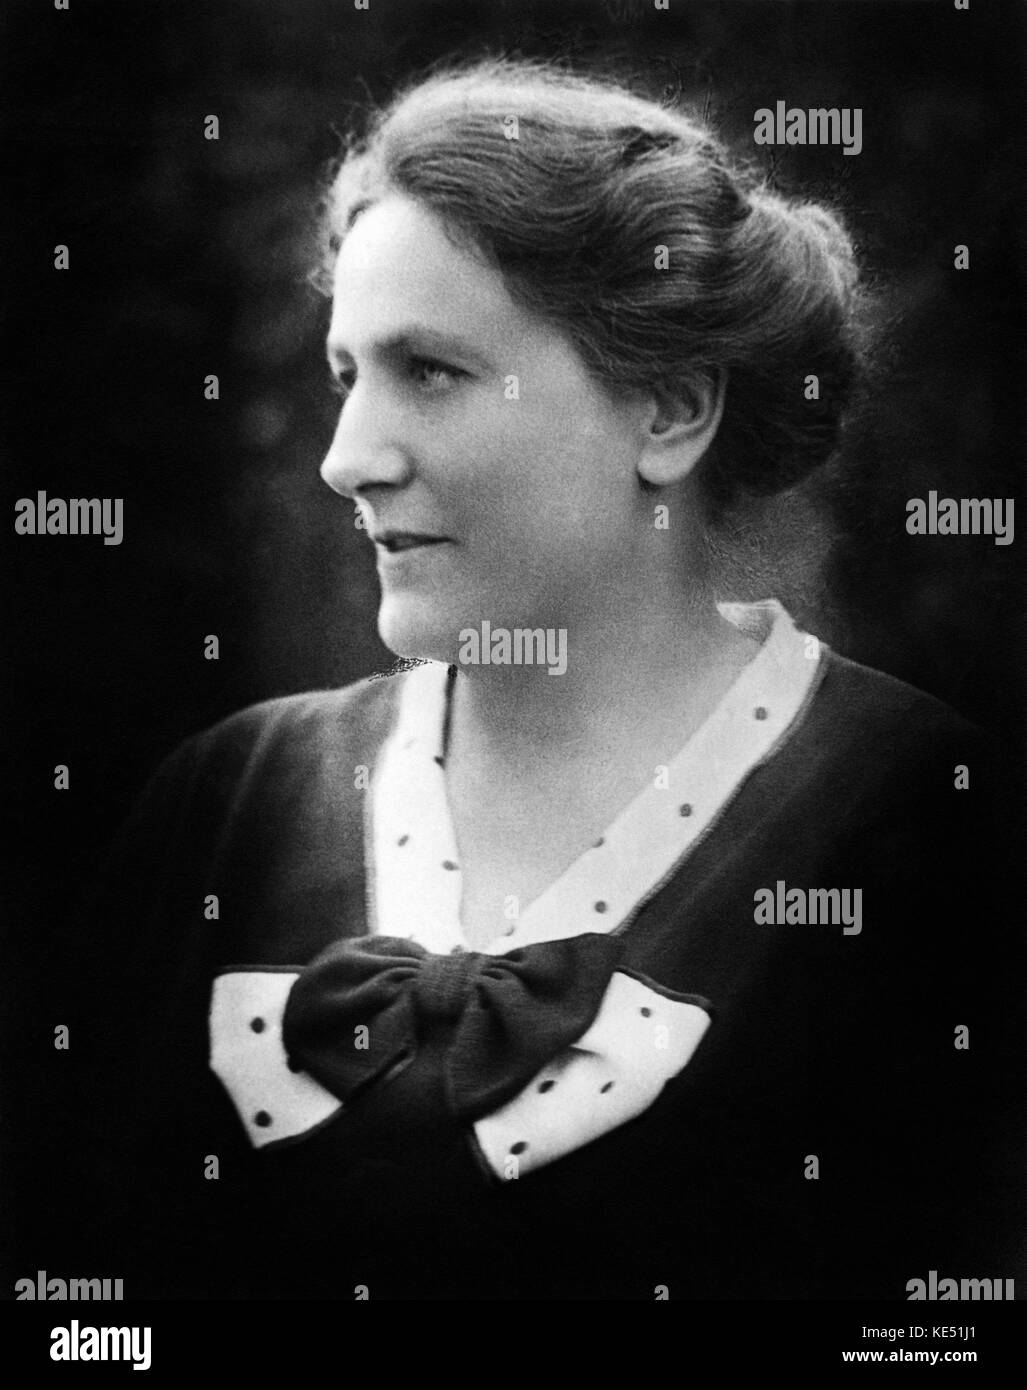 Winifred Wagner - portrait at the Bayreuth Festival, wife of Siegfried Wagner. 23 June 1897 - 5 March 1980. Photo by A. Pierperhoff. Stock Photo